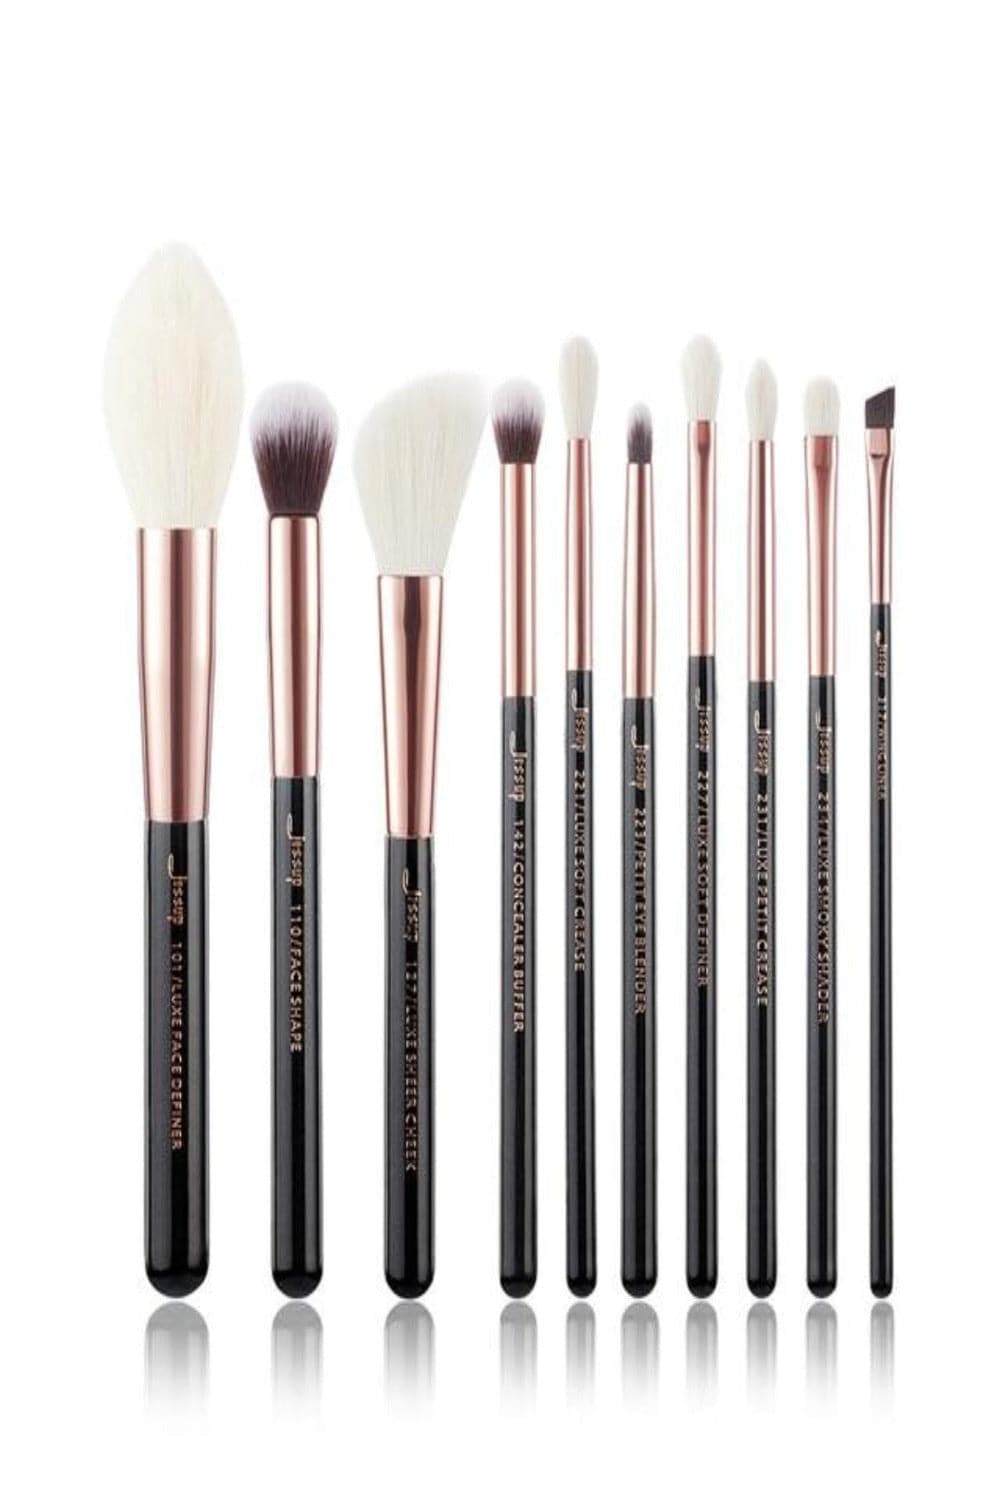 Girl On The Go Pink Professional Makeup Brush Set - 10 Pack - TGC Boutique - Makeup Brushes